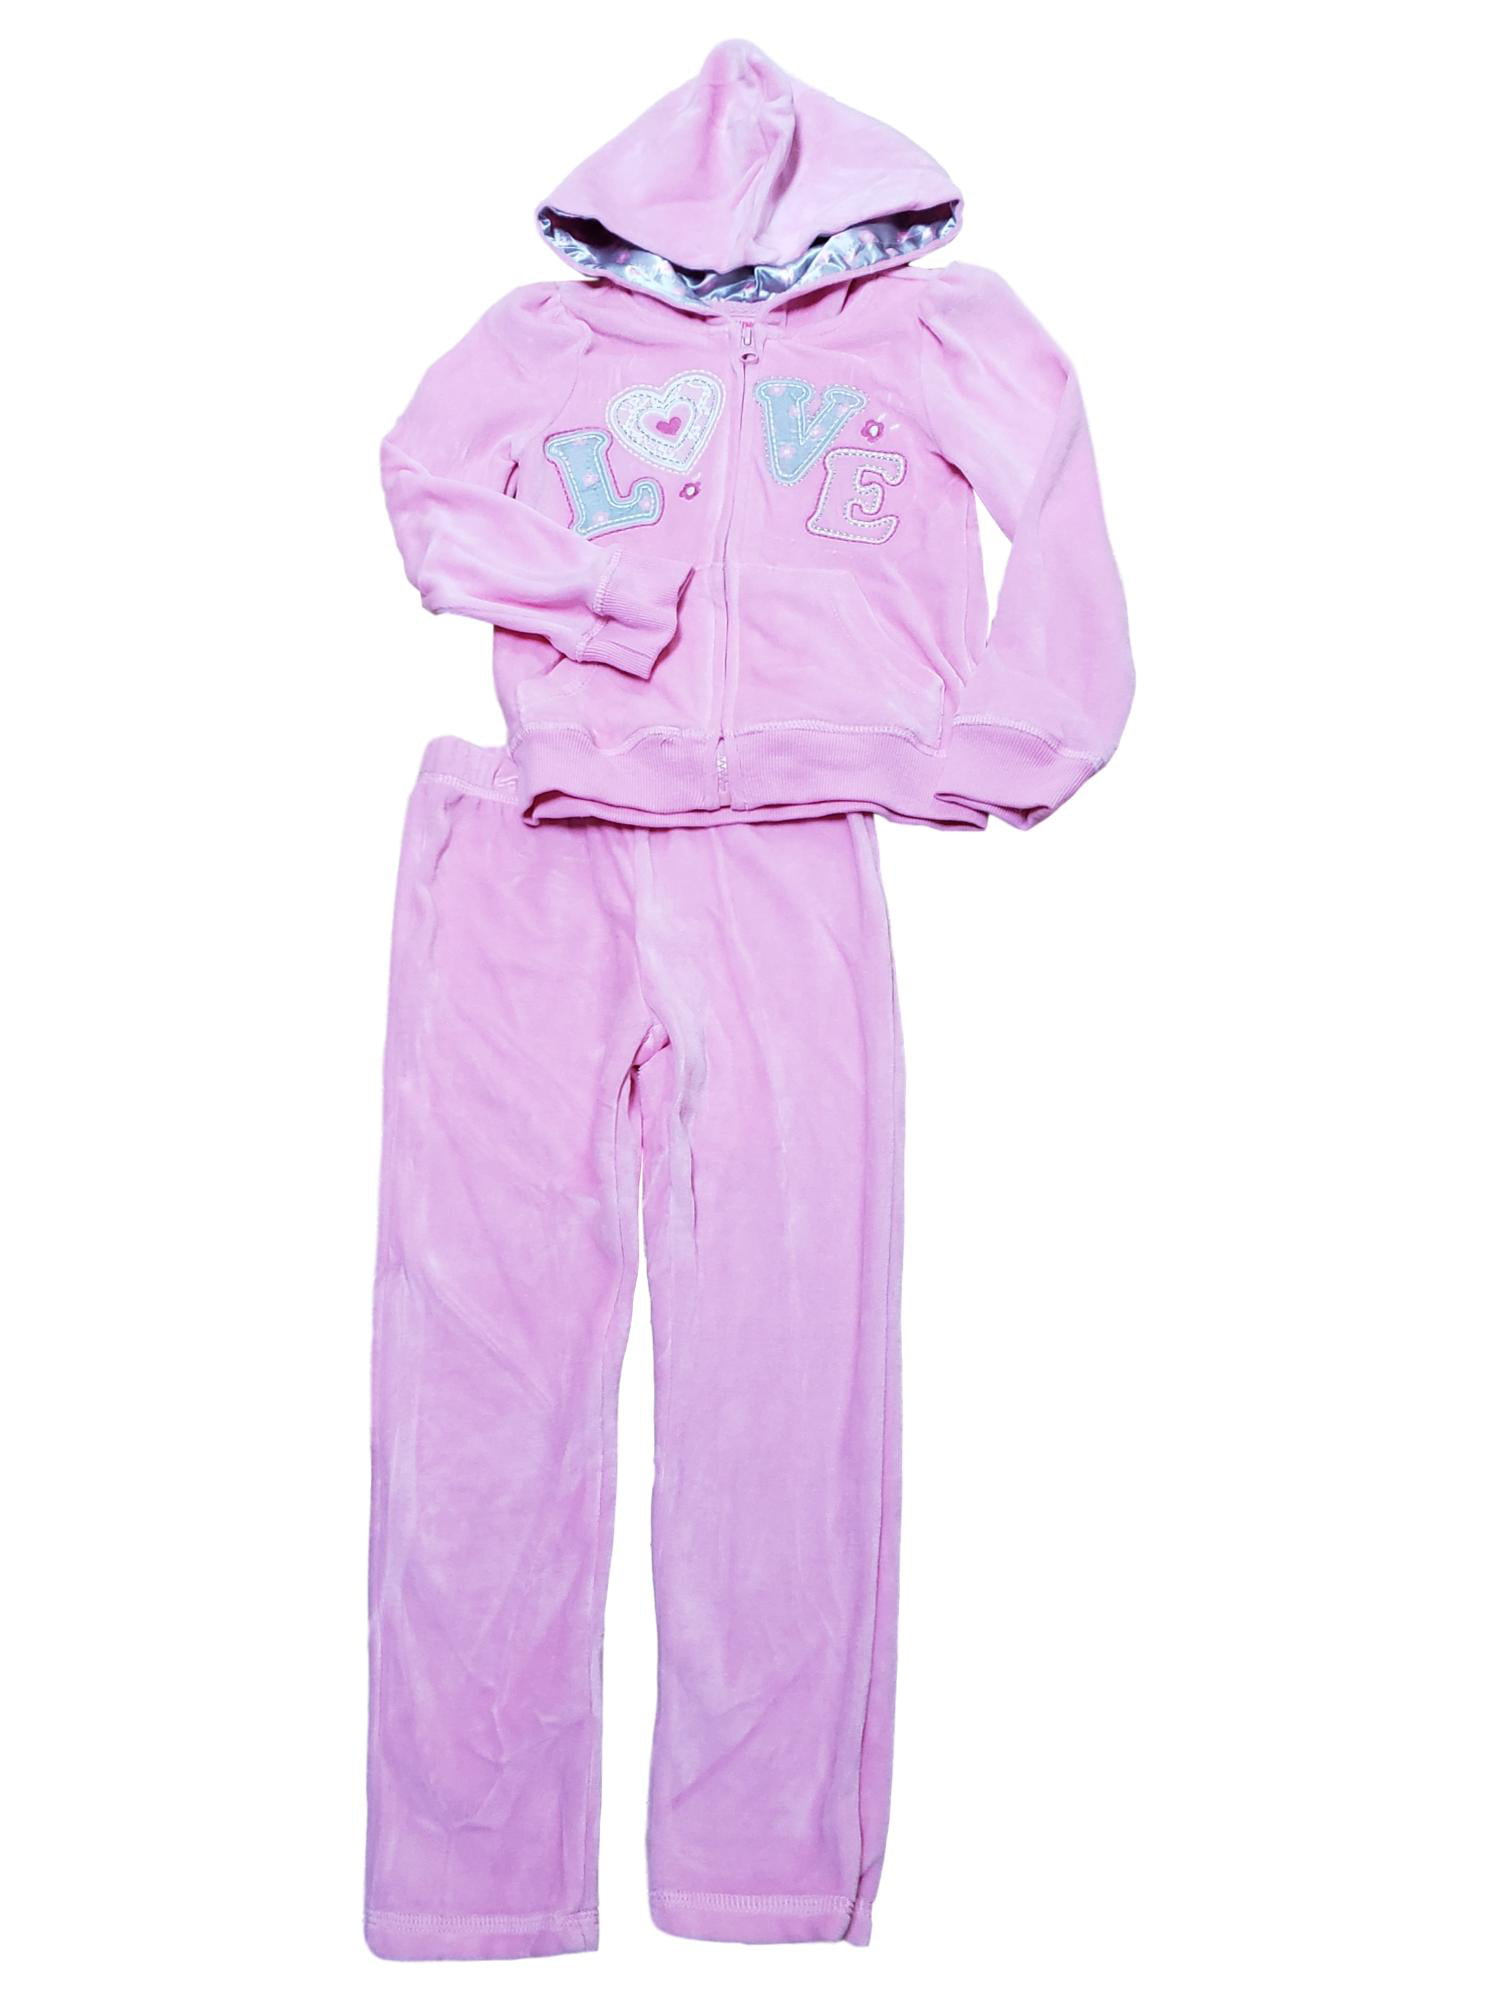 NEW Tie Dye Pink Hooded Sweatshirt Track Suit Girls Outfit Set 2T 3T 4T 5T 